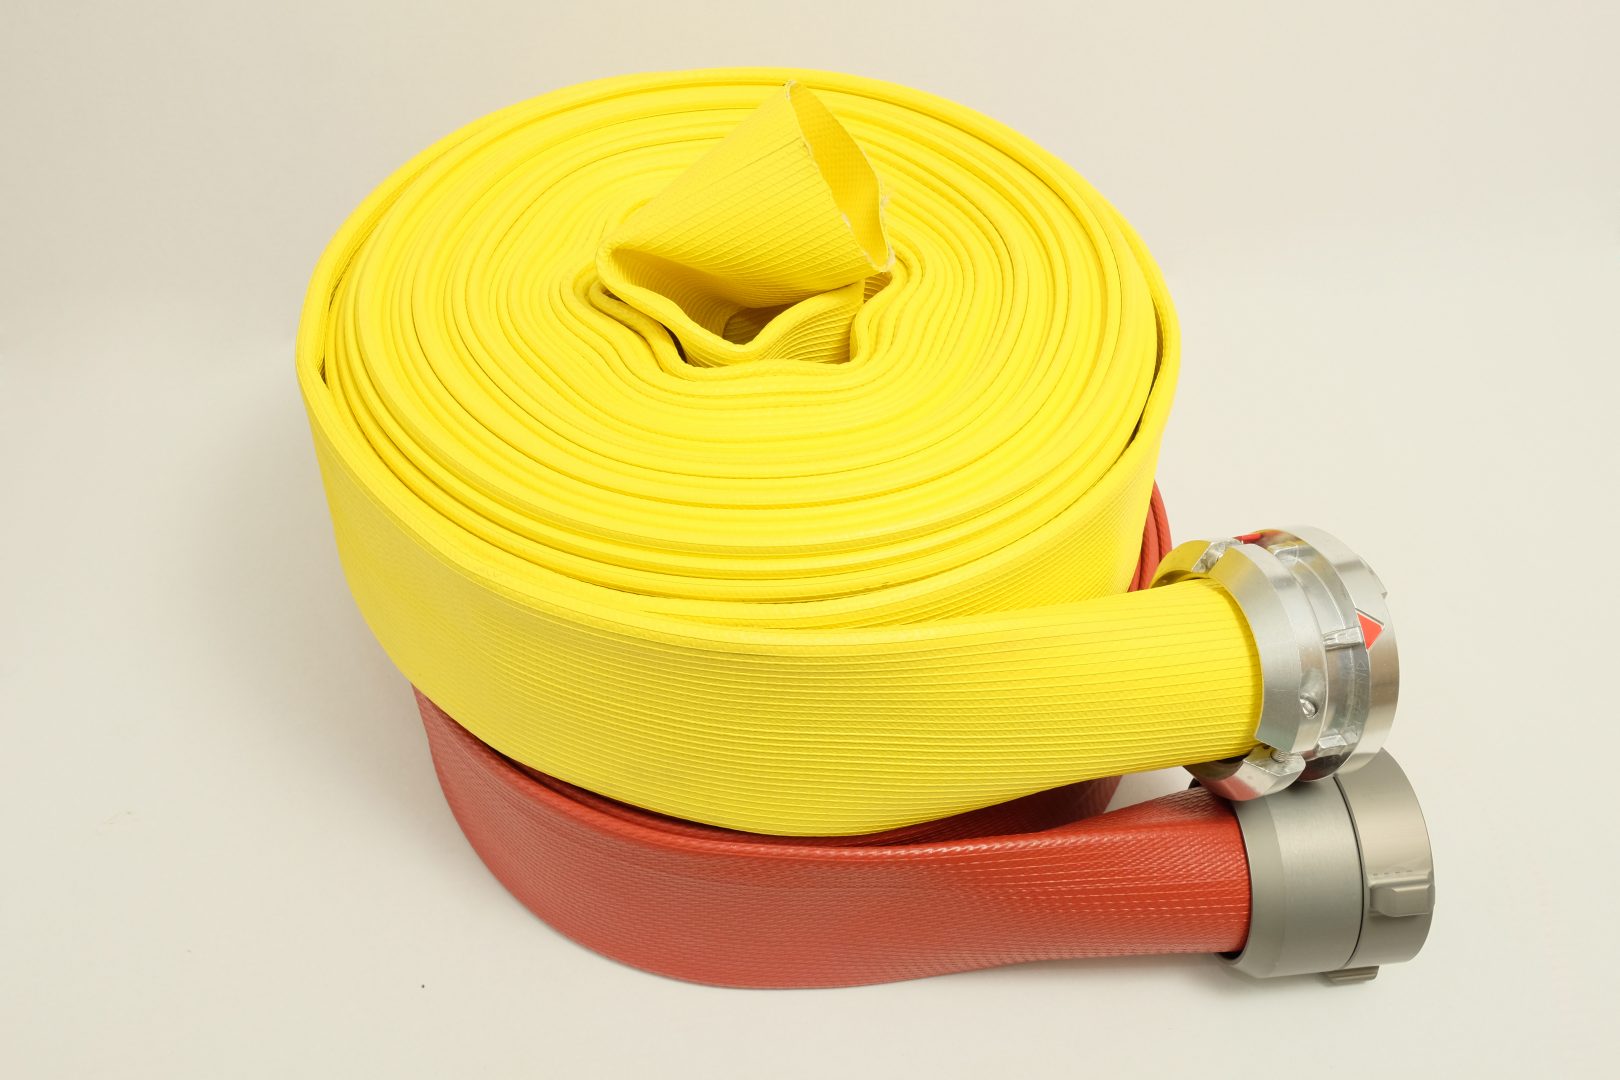 Fire Hose - 2 1/2 x 50' Lay Flat Water Hose - Made in the USA - Red  Firefighter Hose - NH Couplings